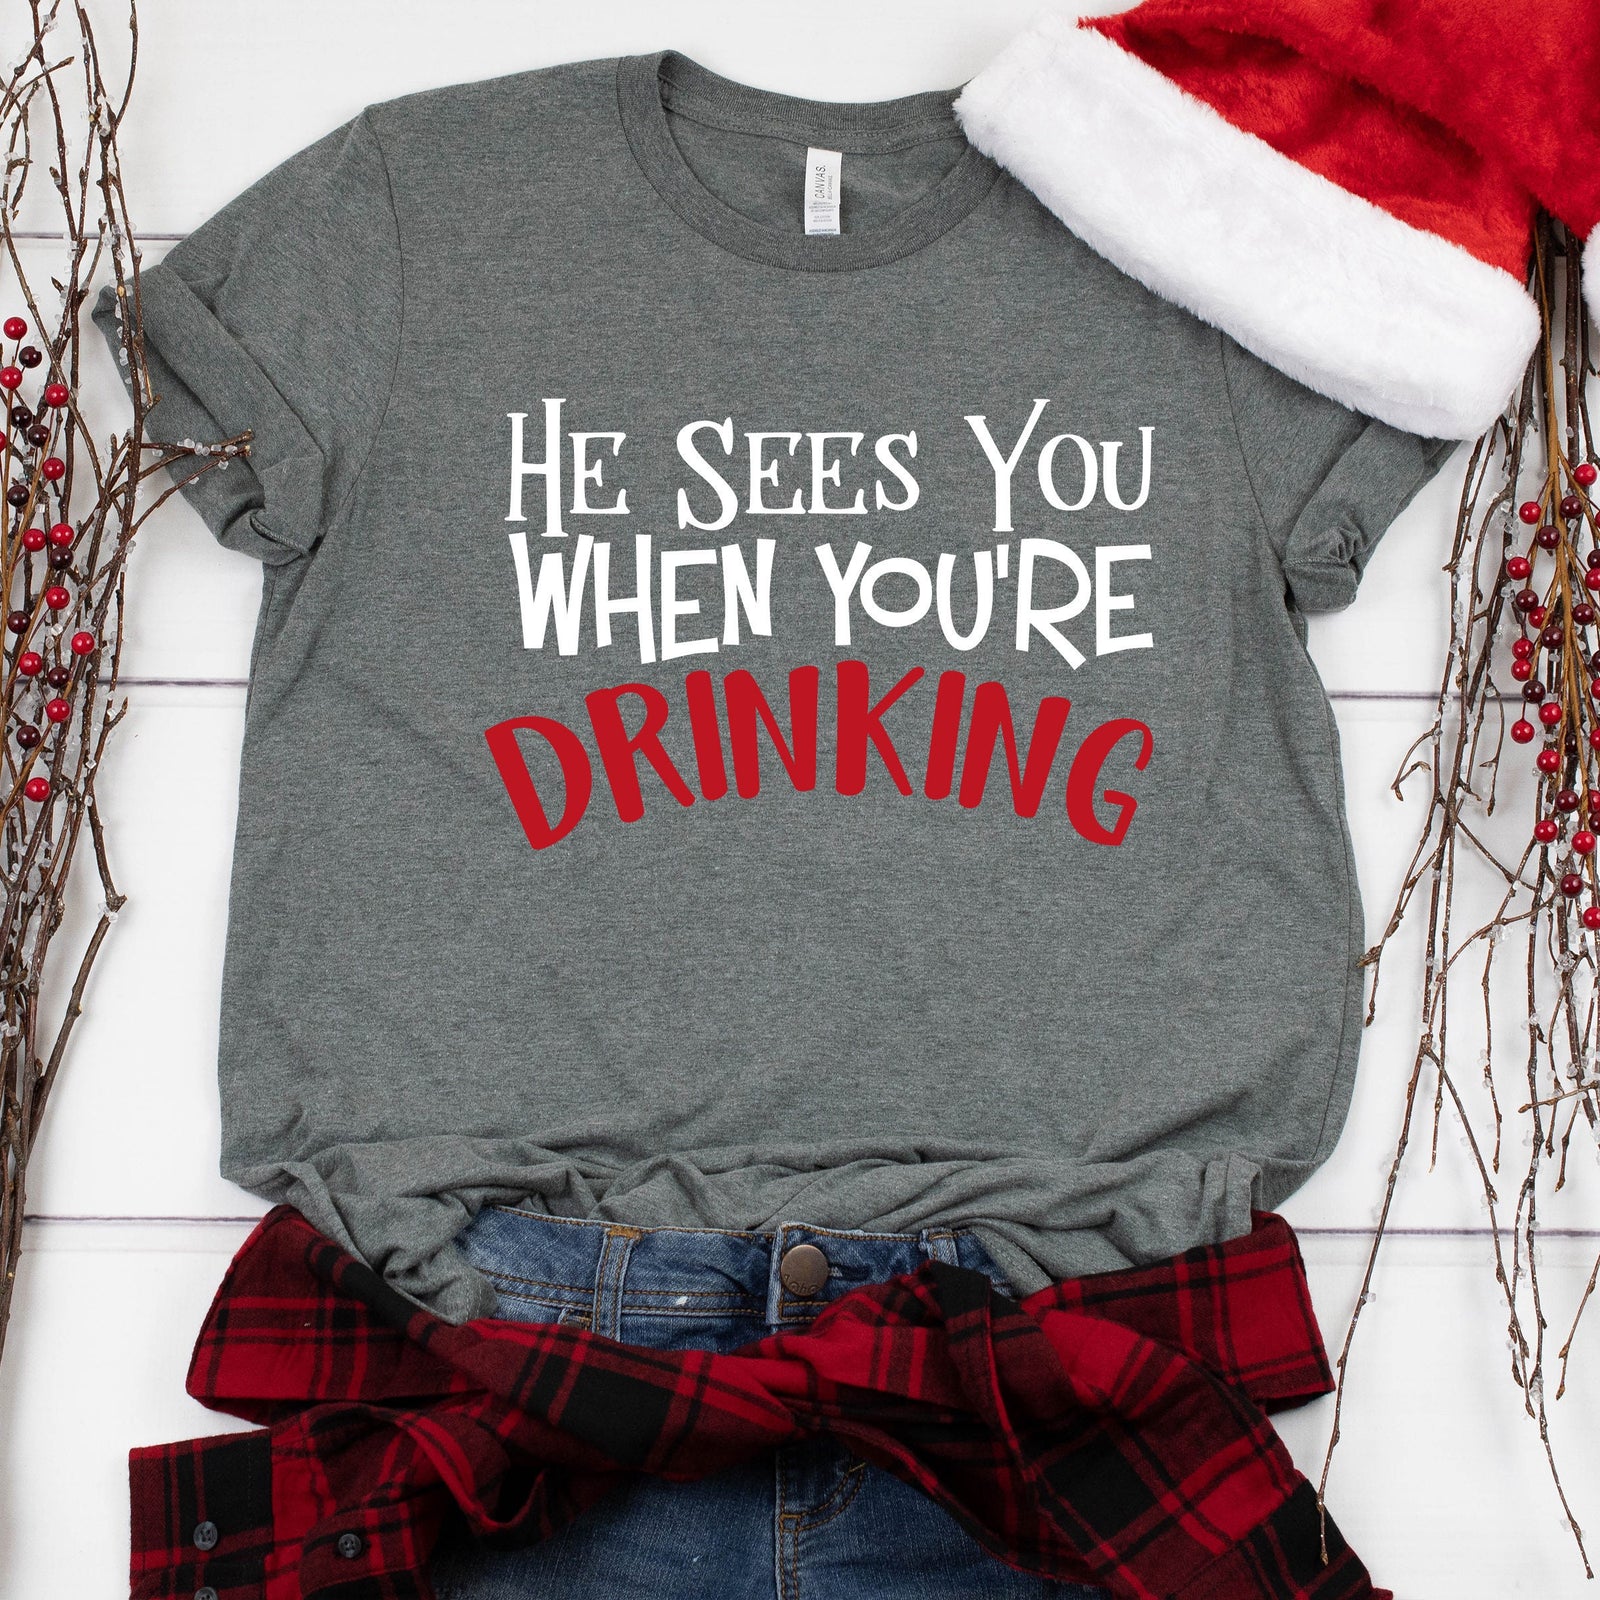 He Sees You When You're Drinking Christmas Shirt - X-Mas T Shirt - Funny Christmas Drinking Shirt - Christmas Party Tee